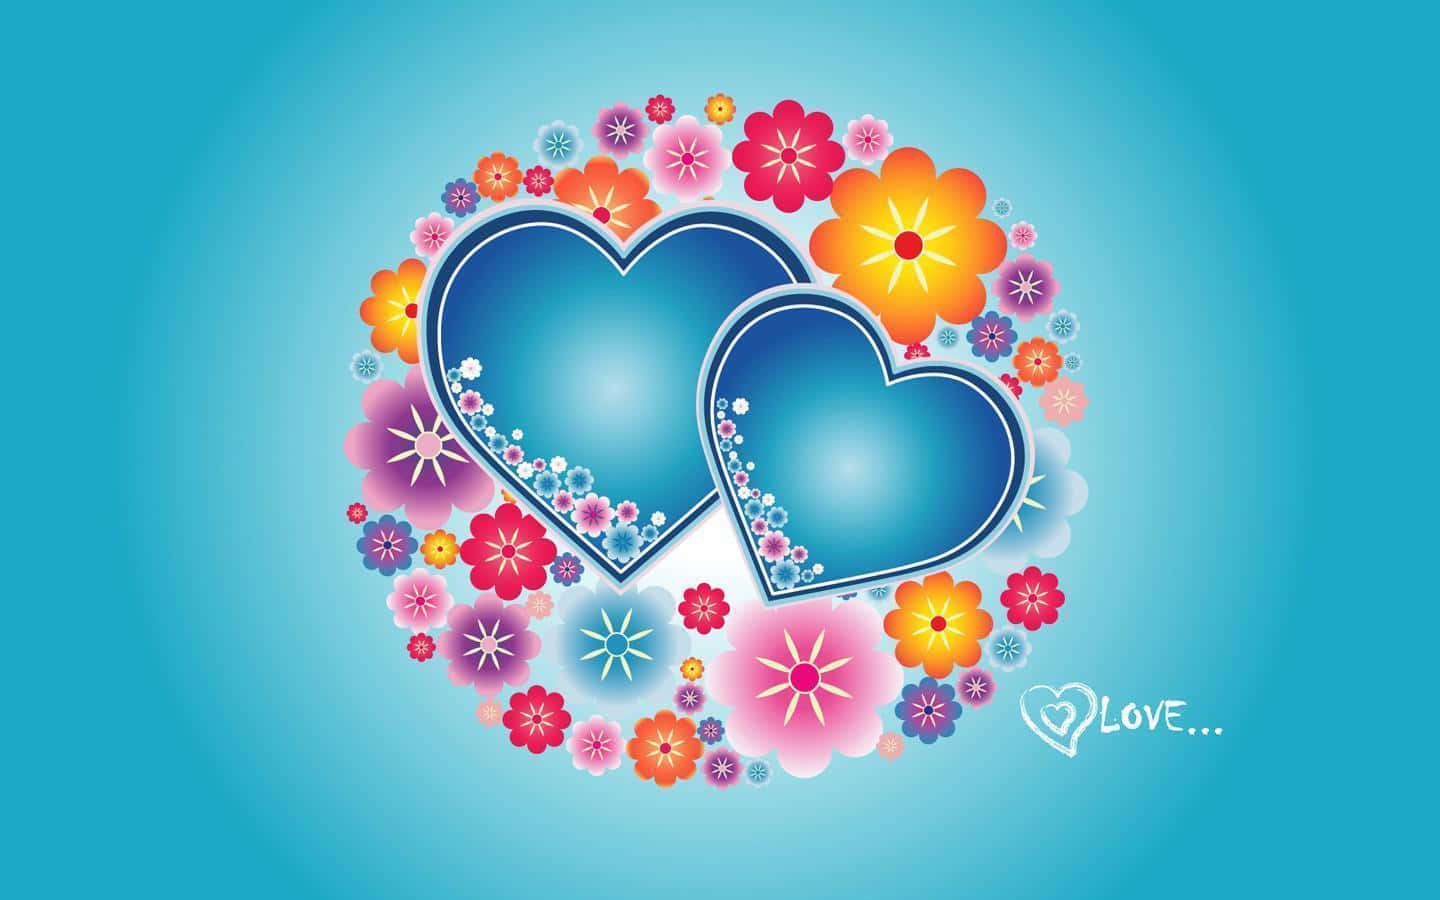 This image displays two cute love hearts to show the beauty of love.